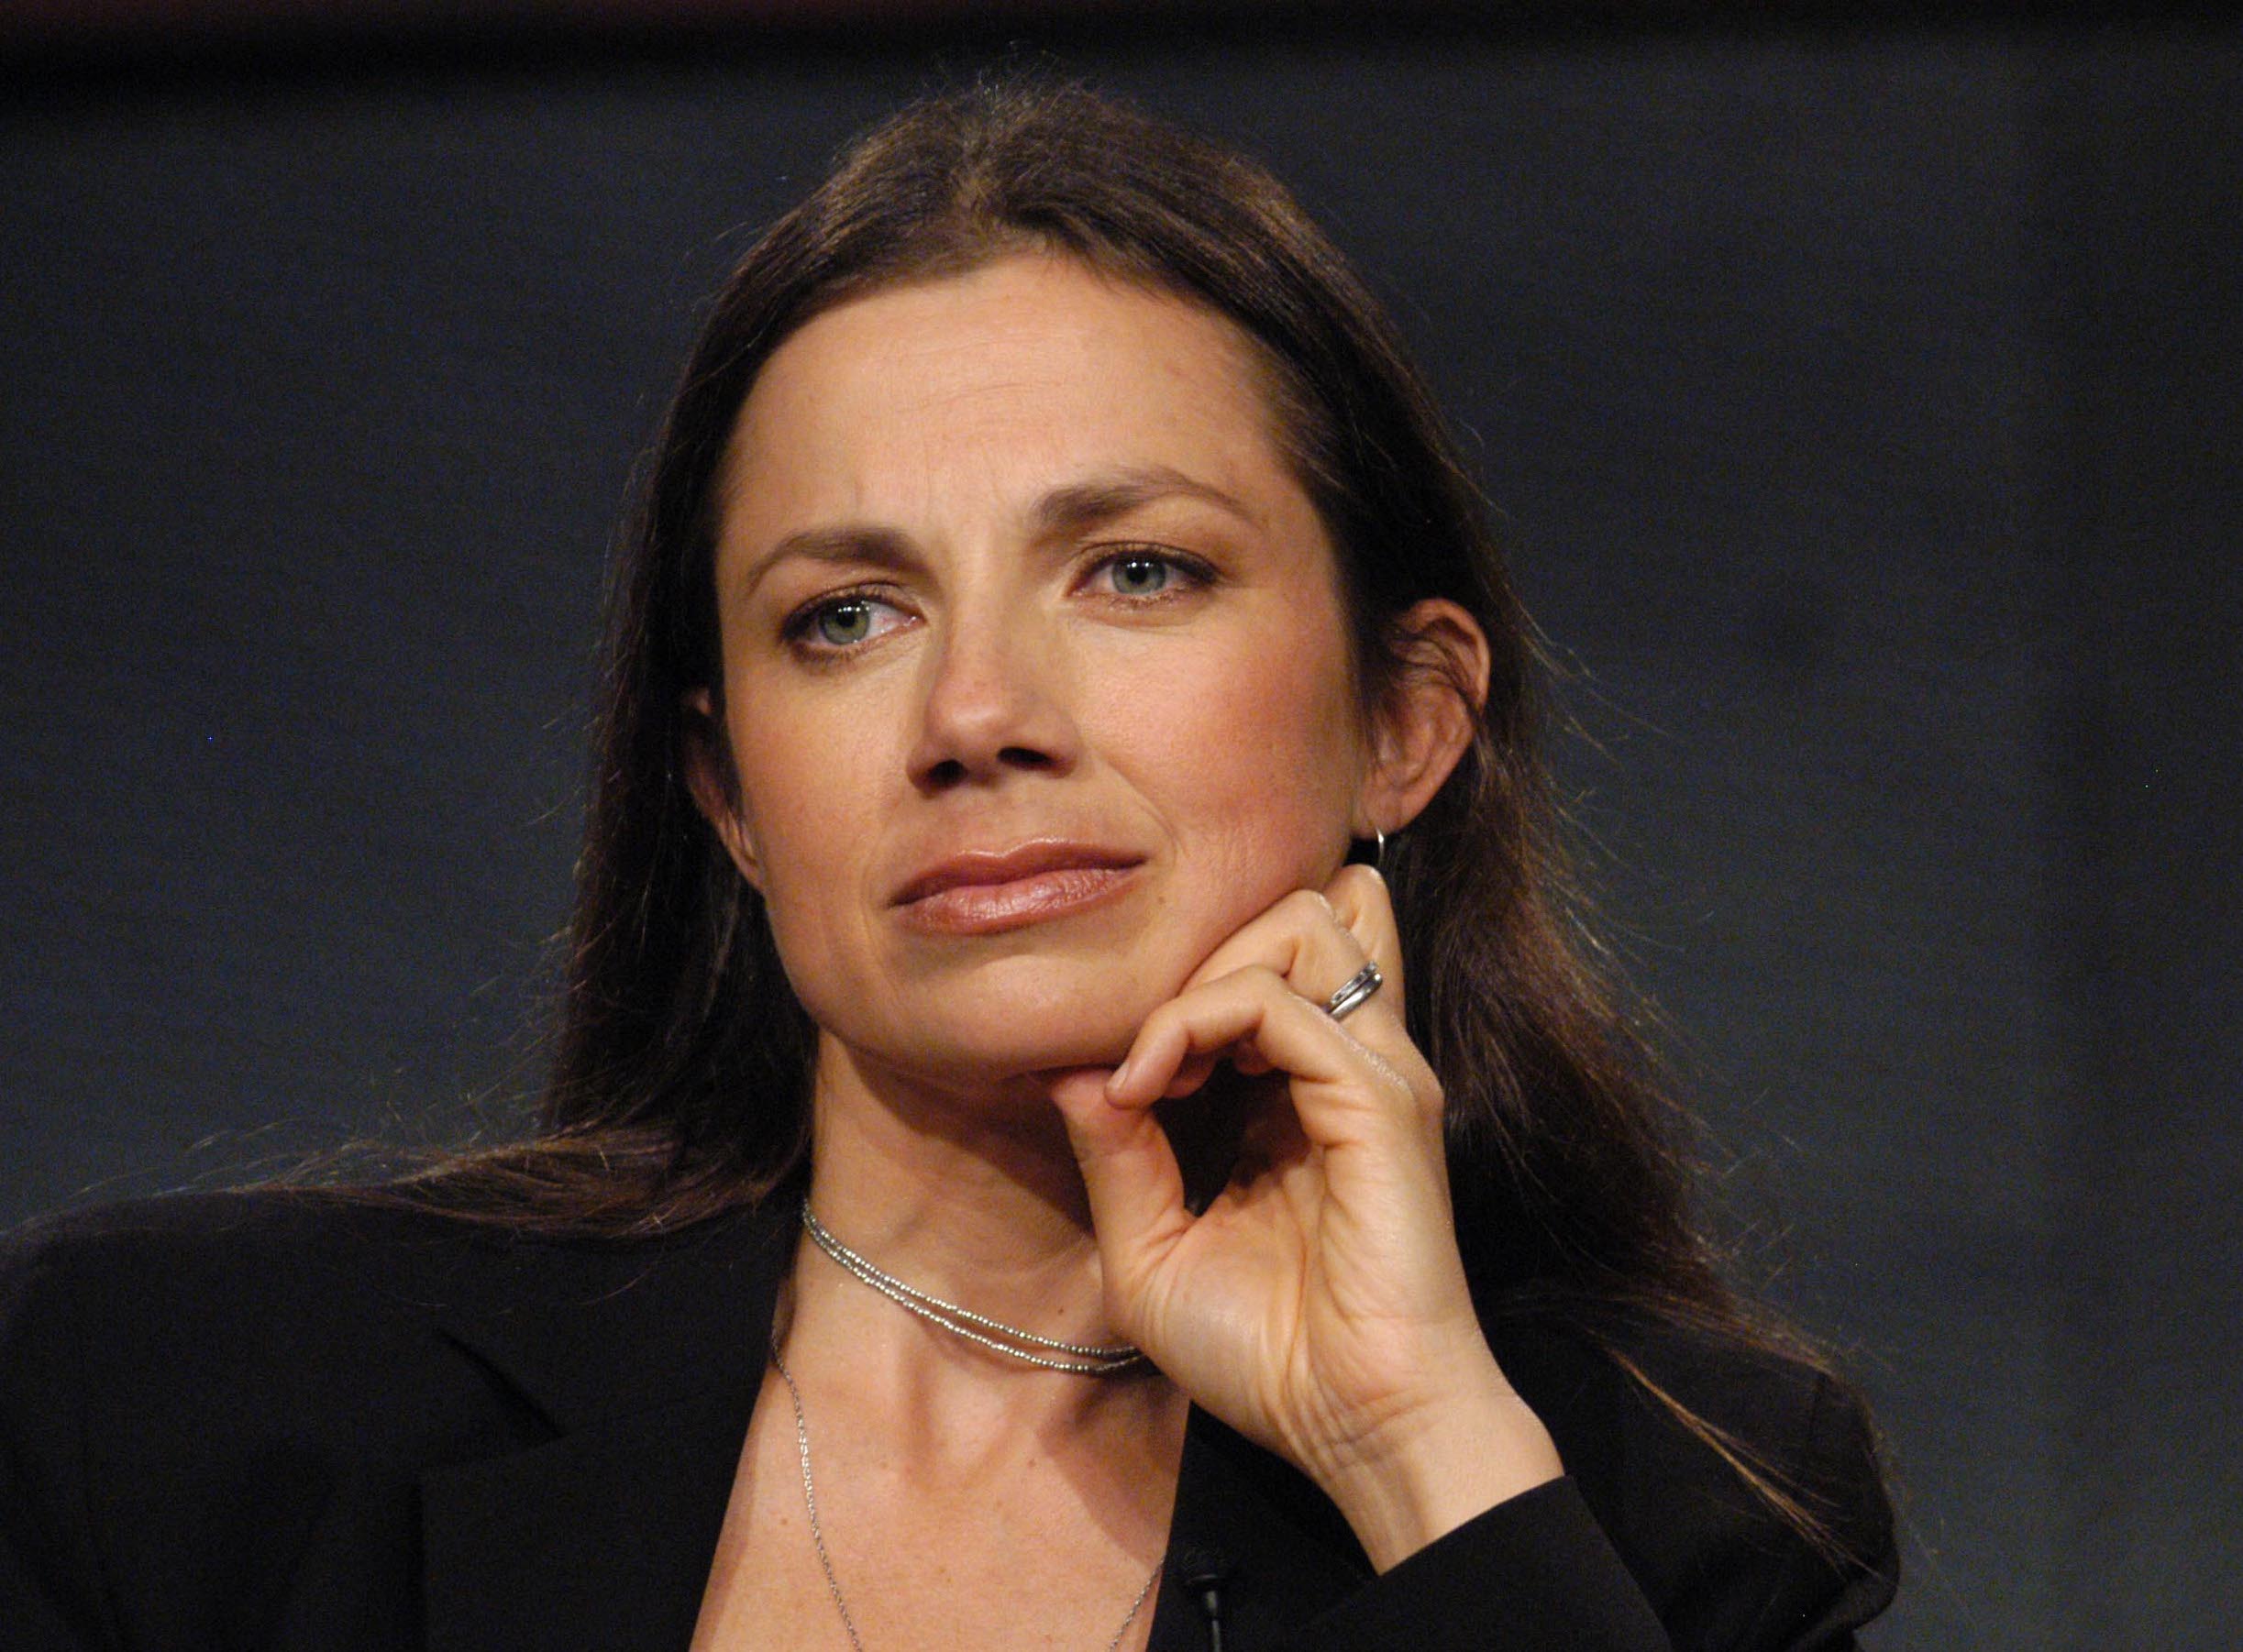 Justine Bateman, known for her role in ‘Family Ties’, opposes AI in Hollywood, stating it takes away from humanity.